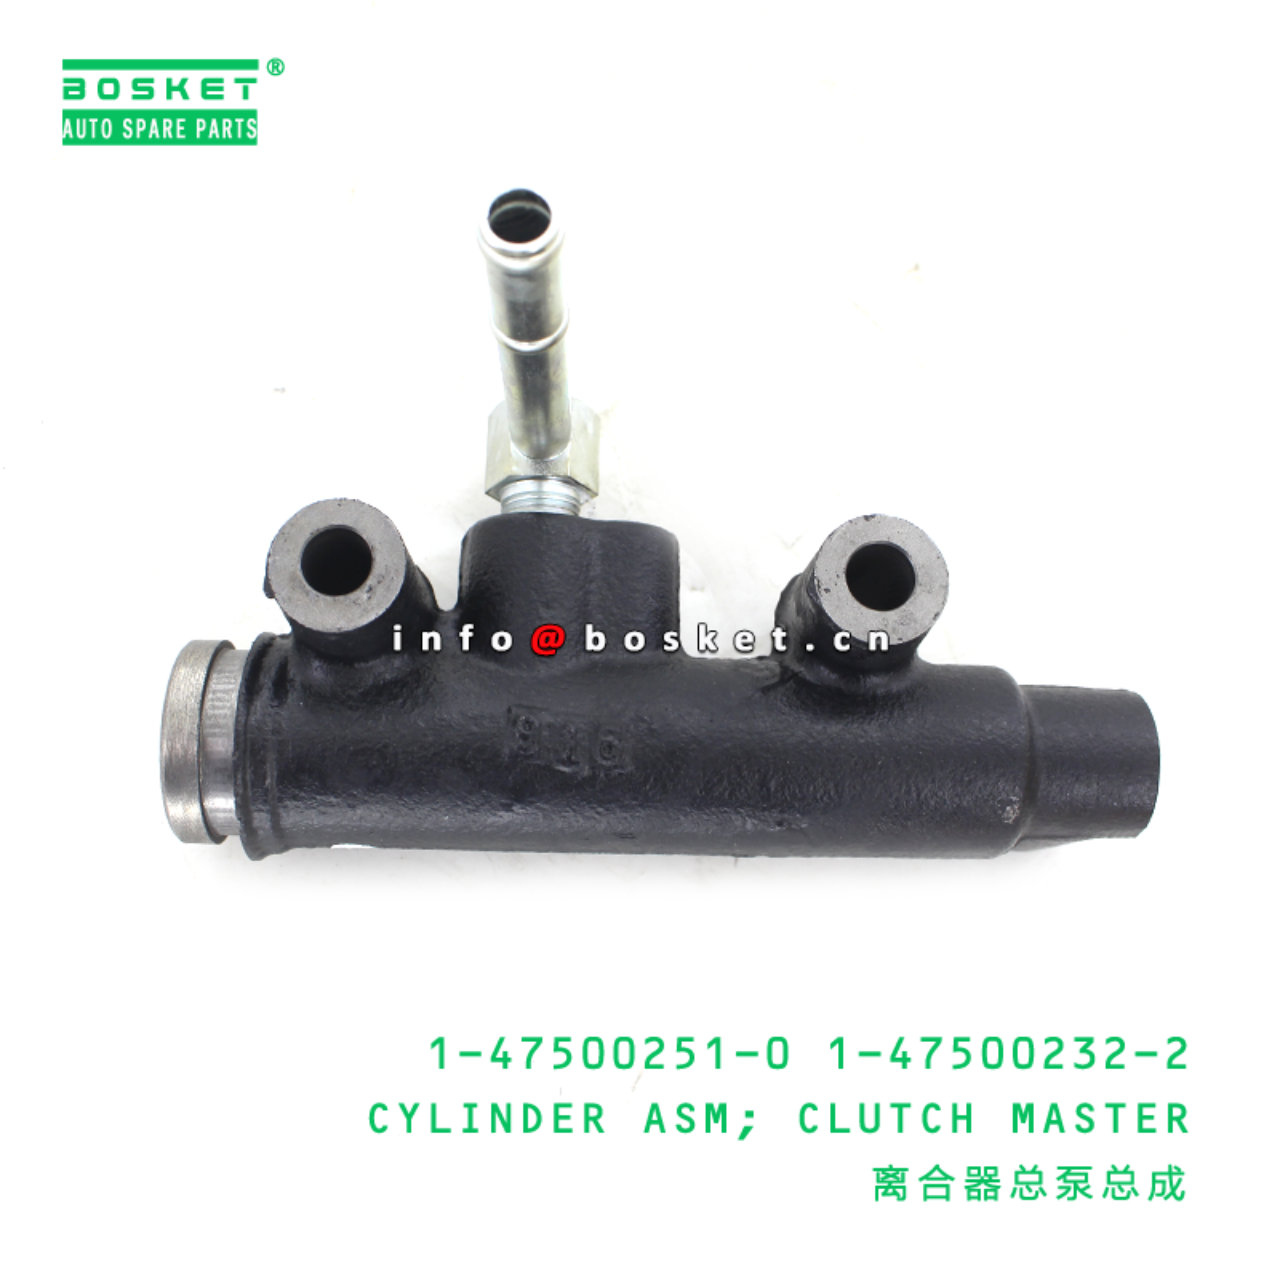 1-47500251-0 1-47500232-2 Clutch Master Cylinder Assembly 1475002510 1475002322 Suitable for ISUZU C